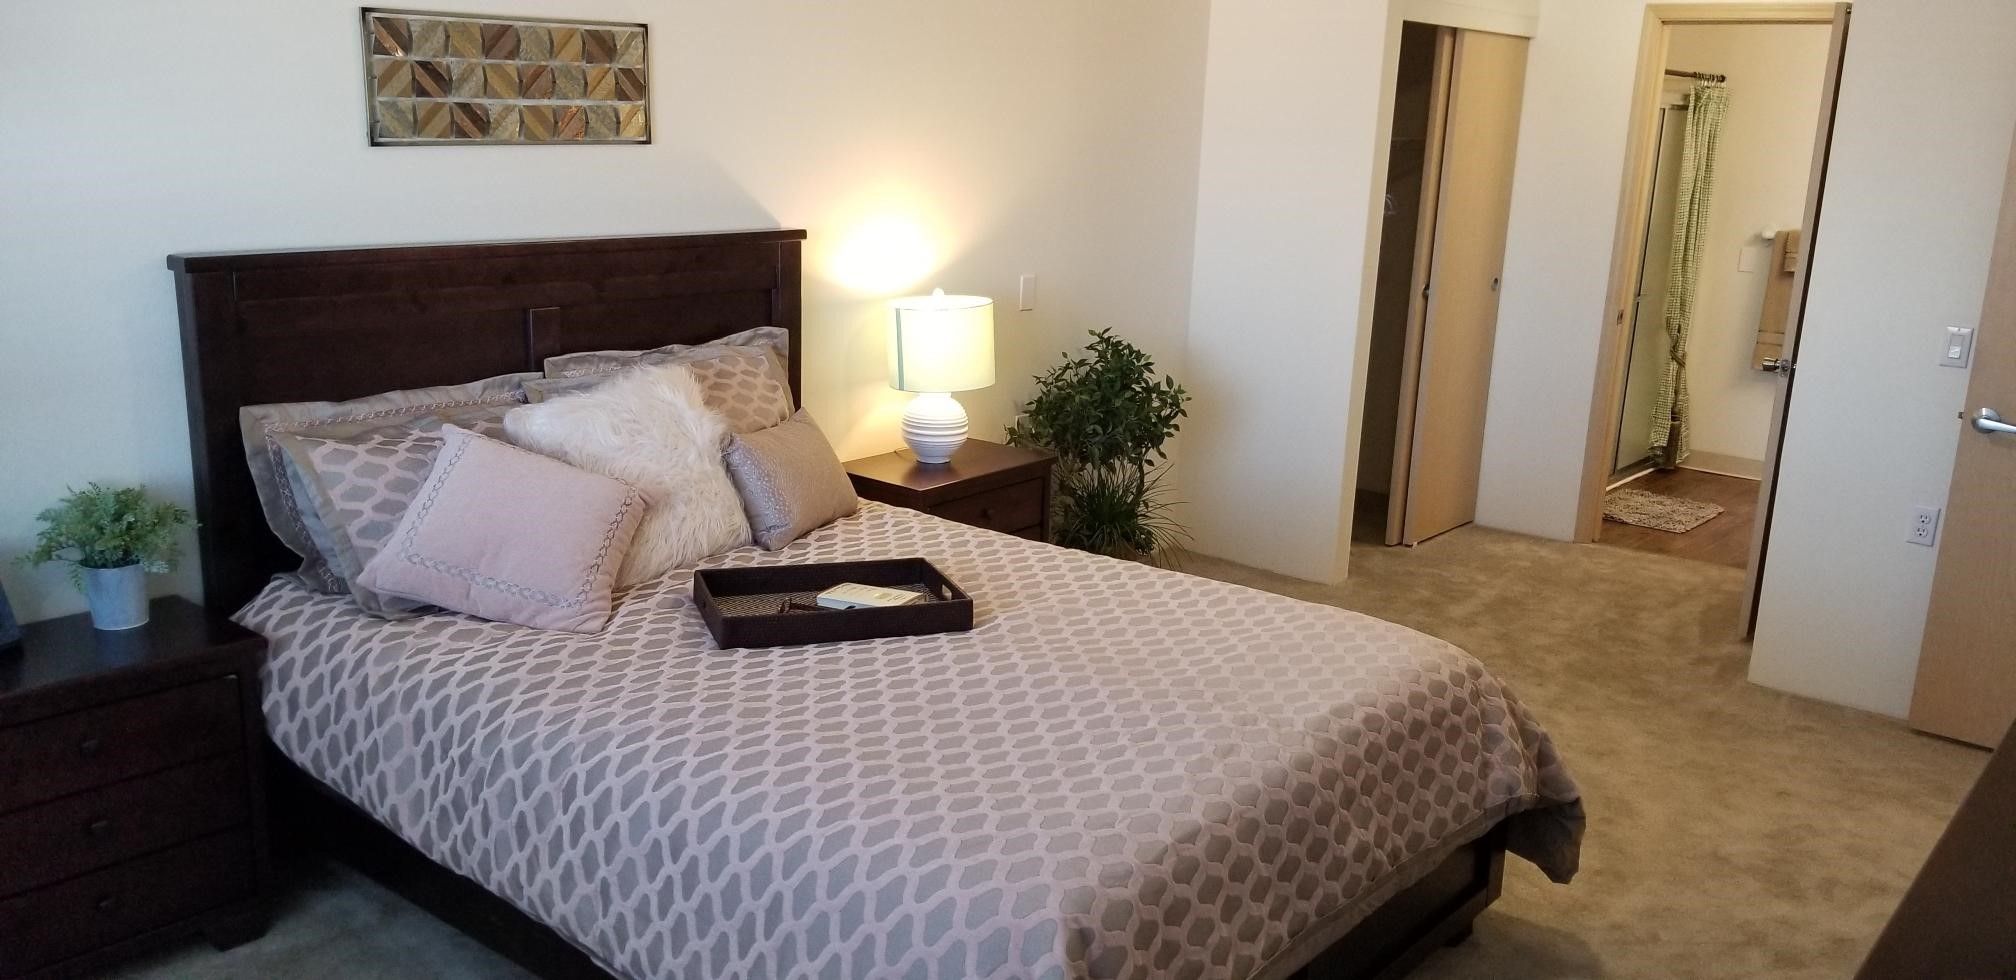 Interior design of a cozy bedroom at Solstice Senior Living At Apple Valley with elegant decor.